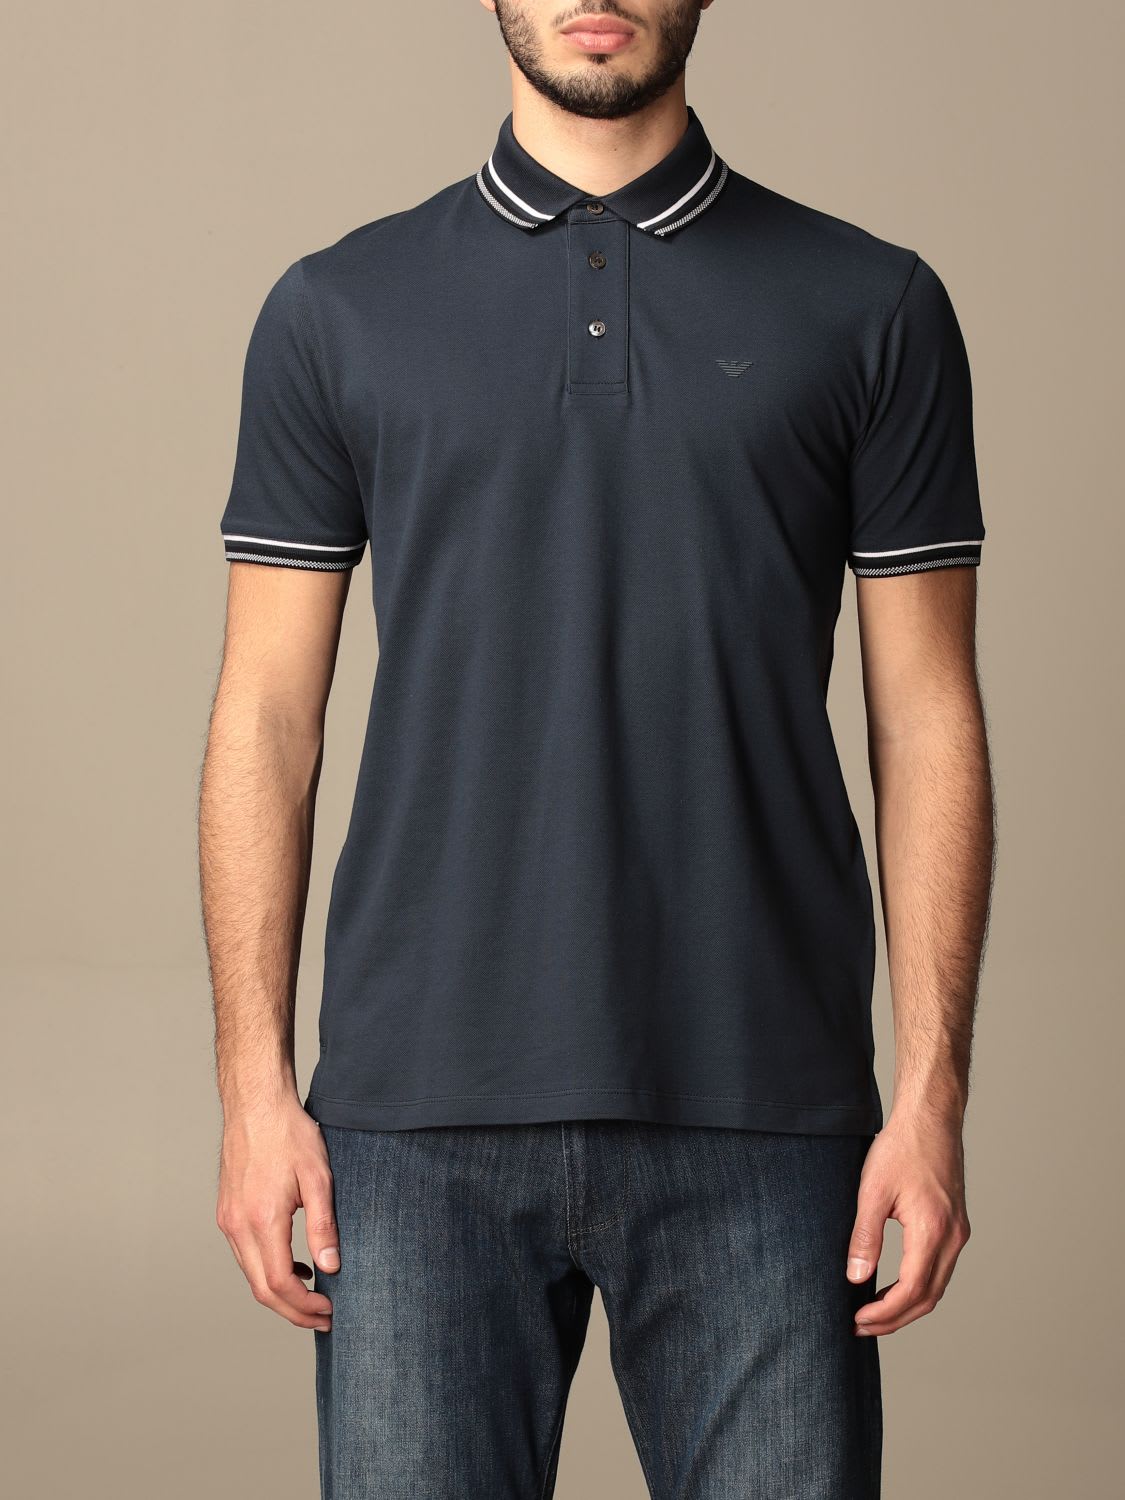 Emporio Armani Polo Shirt Emporio Armani Polo Shirt In Cotton With Logo